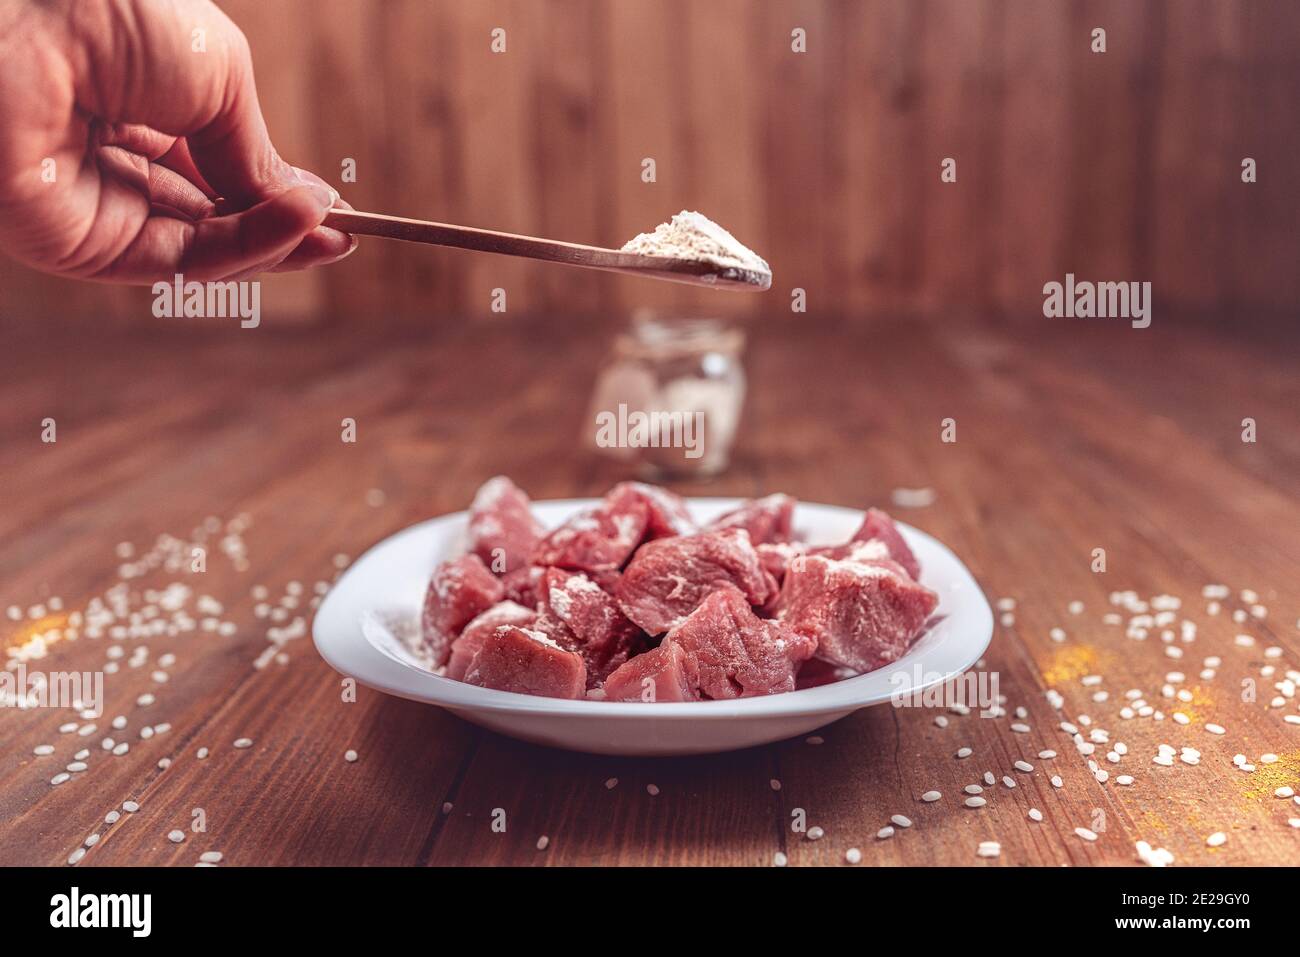 Is It Safe to Cook Raw Meat with a Wooden Spoon?